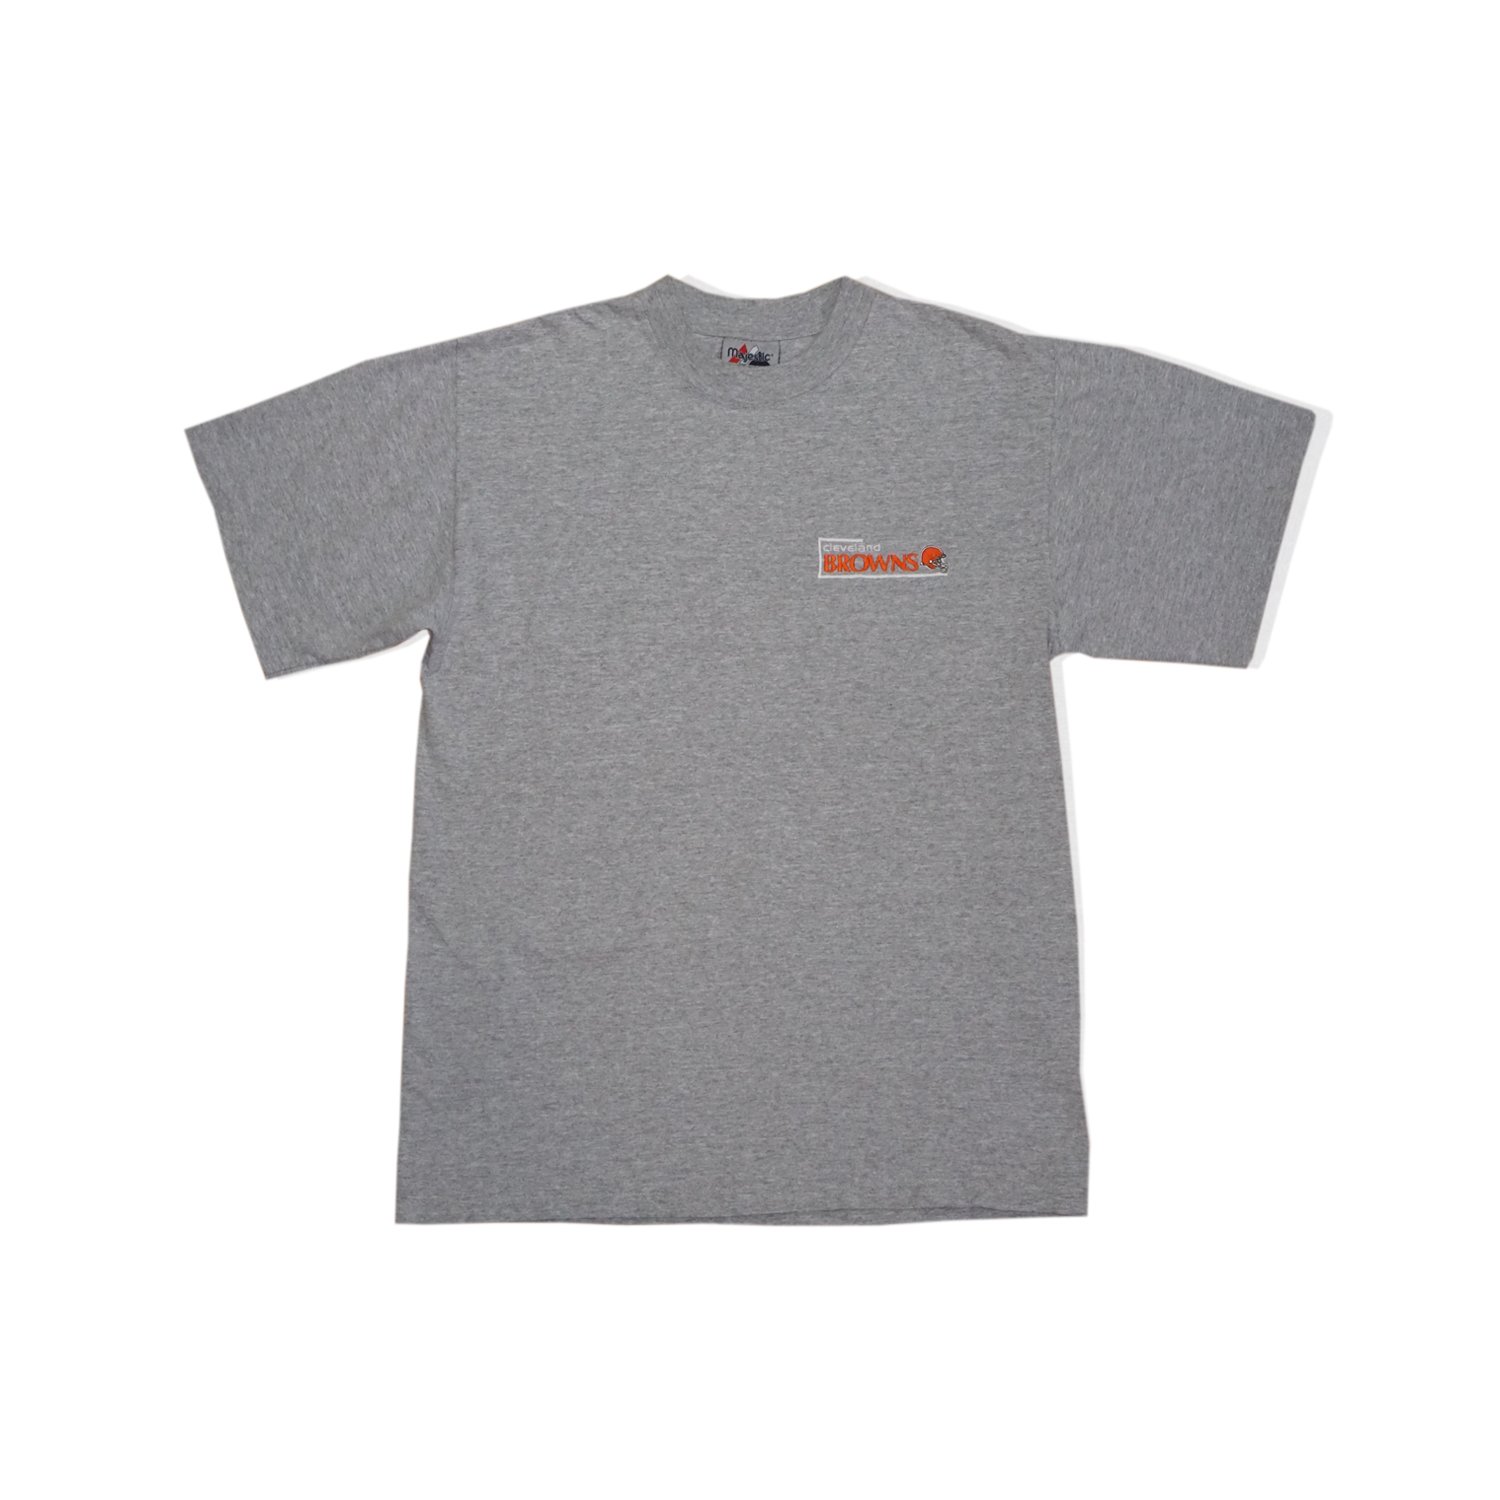 Retro Cleveland Browns Basic Grey T-Shirt (Sam Russo Collection)